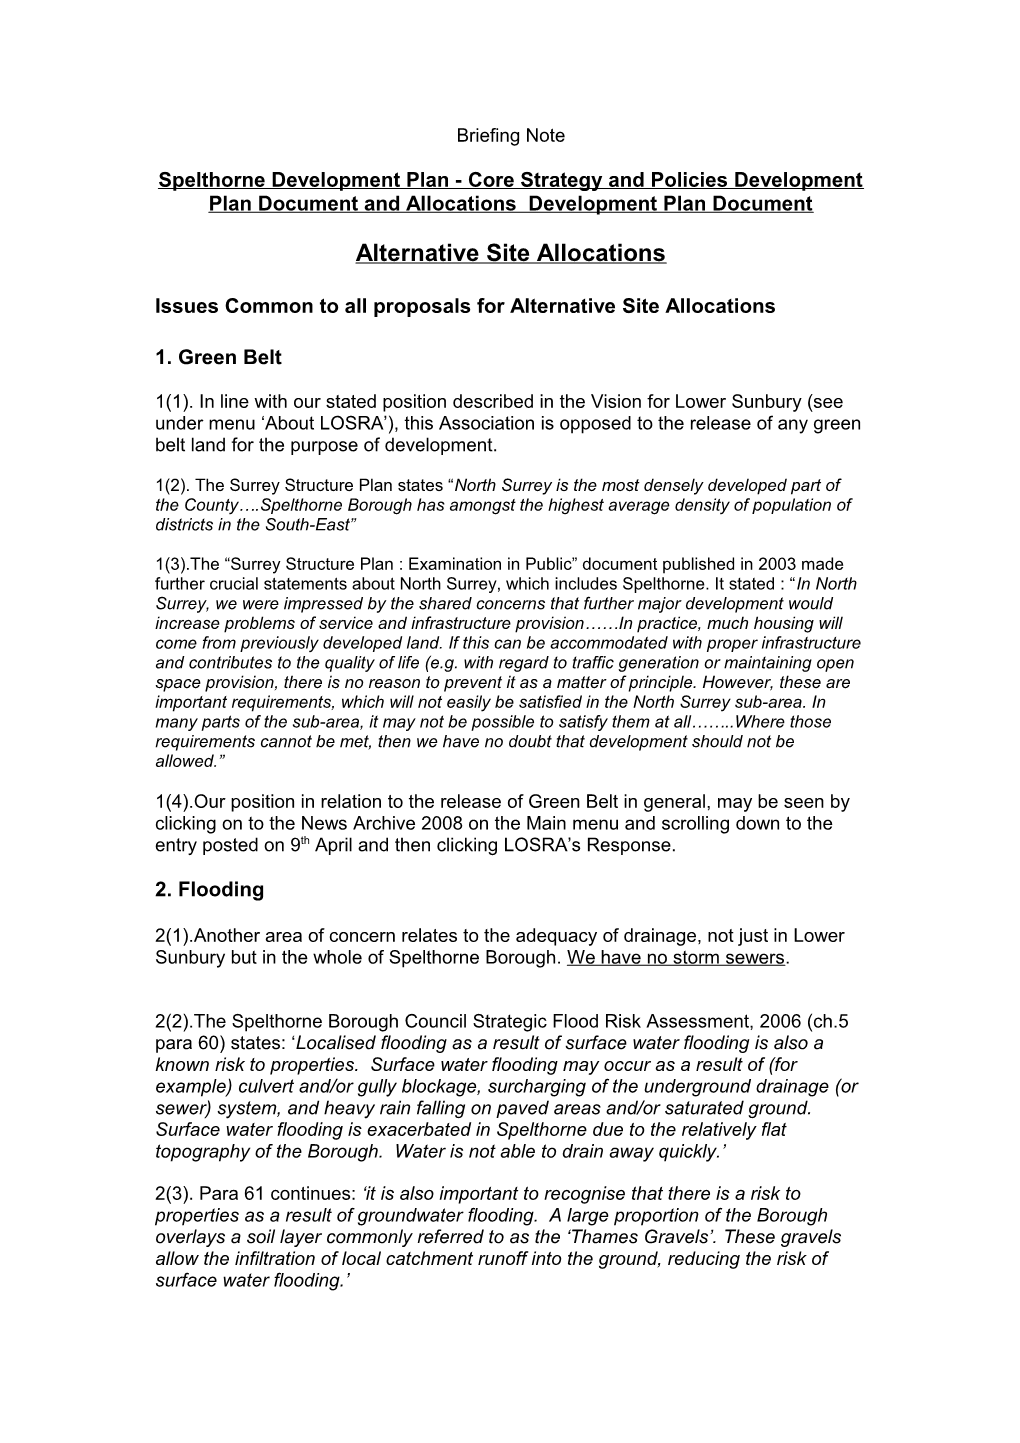 Issues Common to All Proposals for Alternative Site Allocations